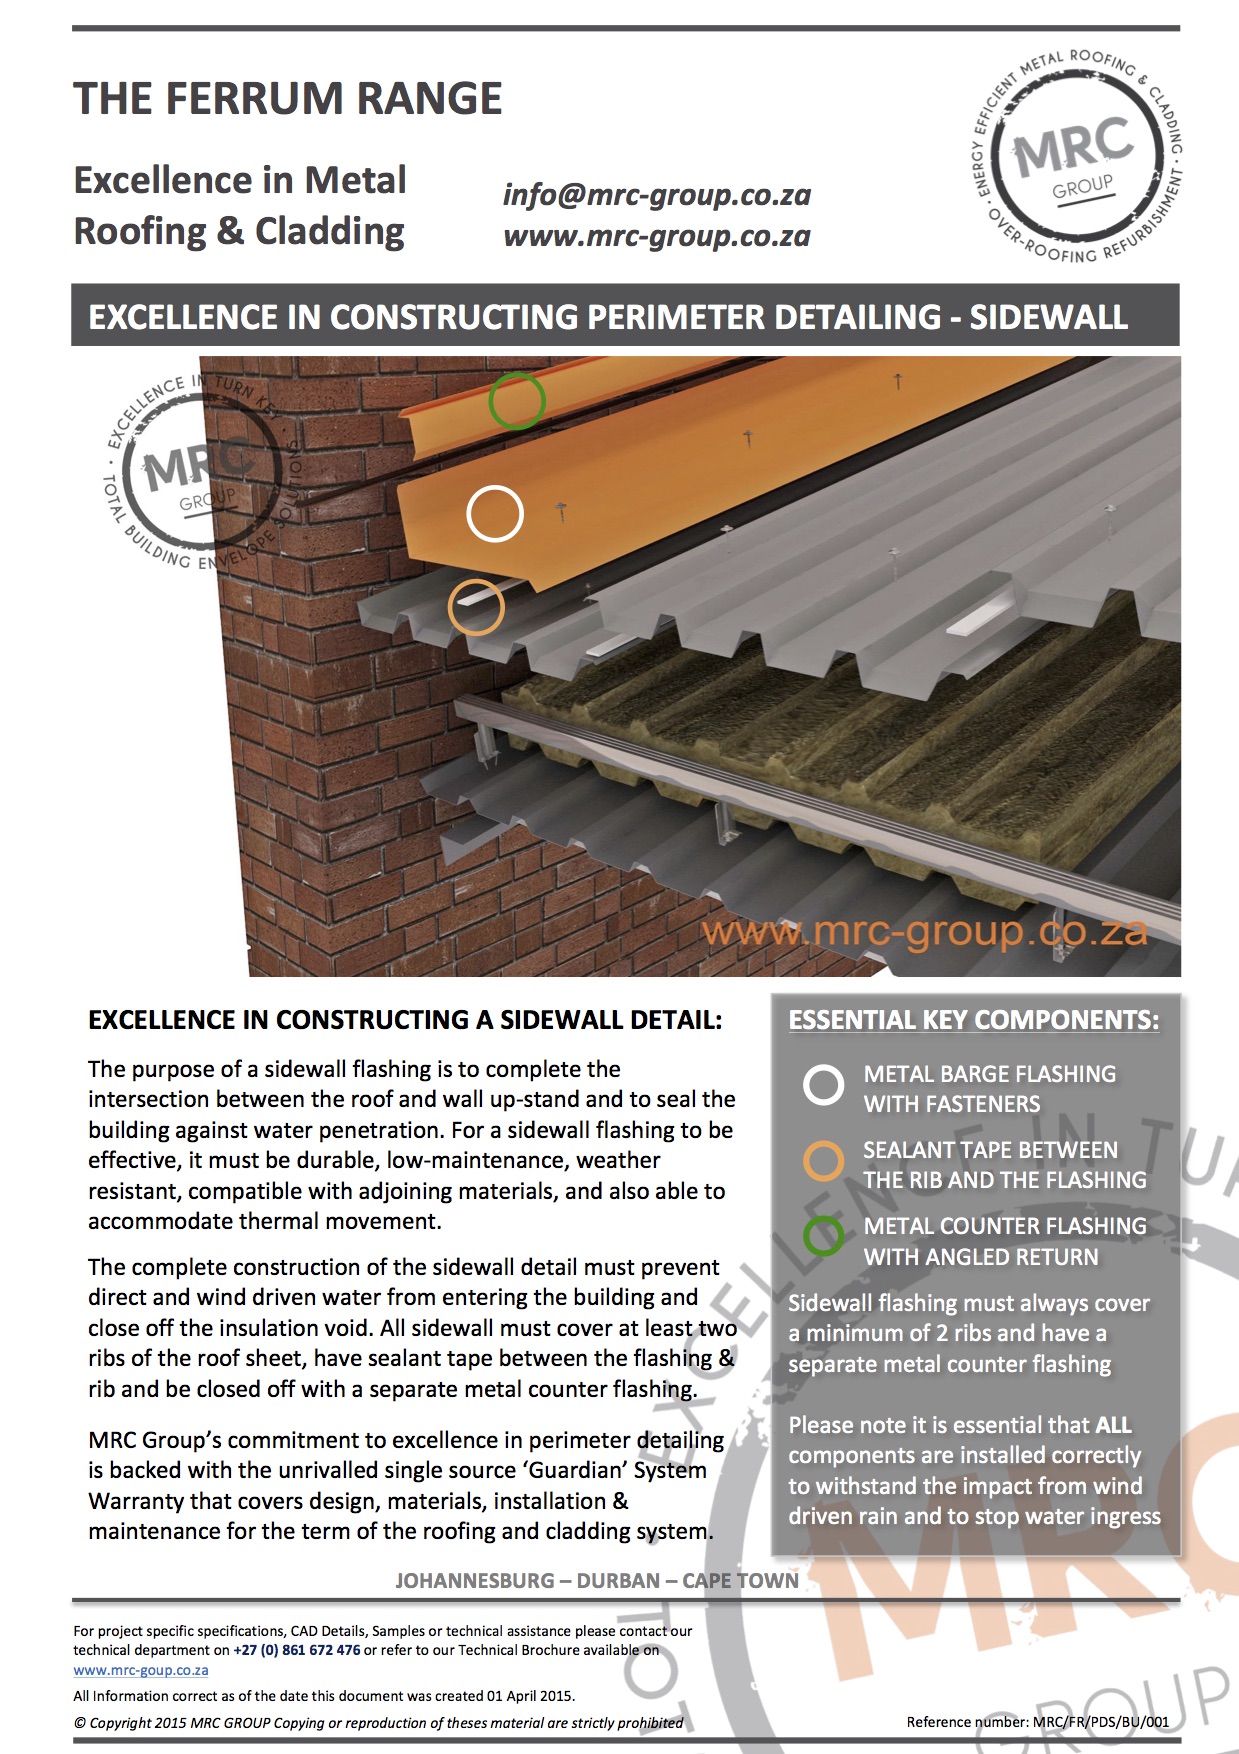 MRC Group Perimeter Detailing Sidewall Metal Roofing backed with the Guardian System Warranty Data Sheet June 2015